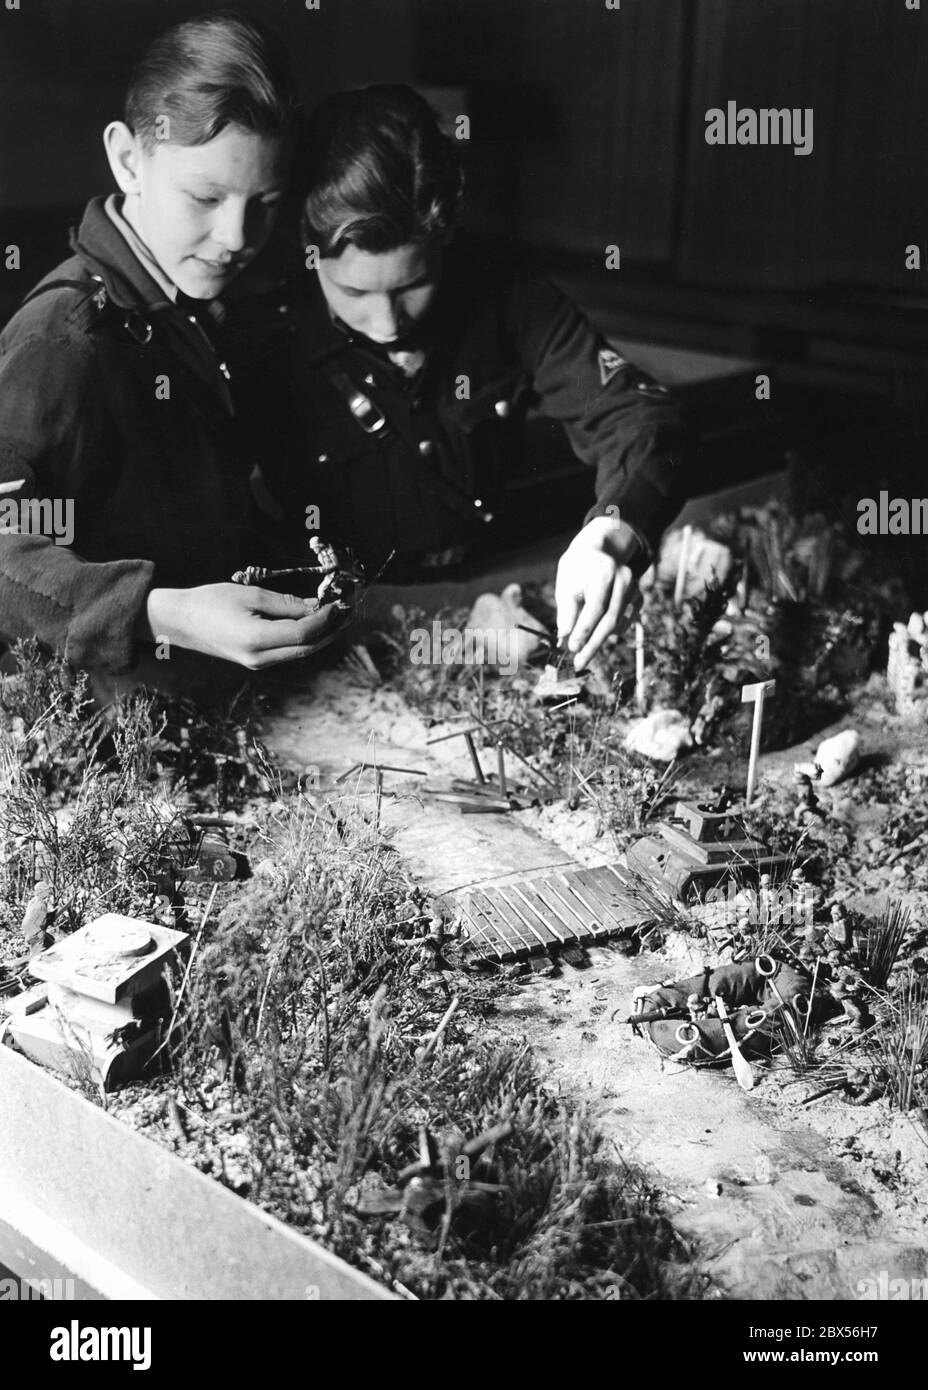 Two students of the Westendschule Eberswalde at their sandbox work for the exhibition 'Ran an den Sandkasten' of the National Socialist Teachers' Association (Reich Administration, Liaison Office Berlin). It depicts a river crossing with raft bags and makeshift bridges. Besides that, toy soldiers and toy tanks. Stock Photo